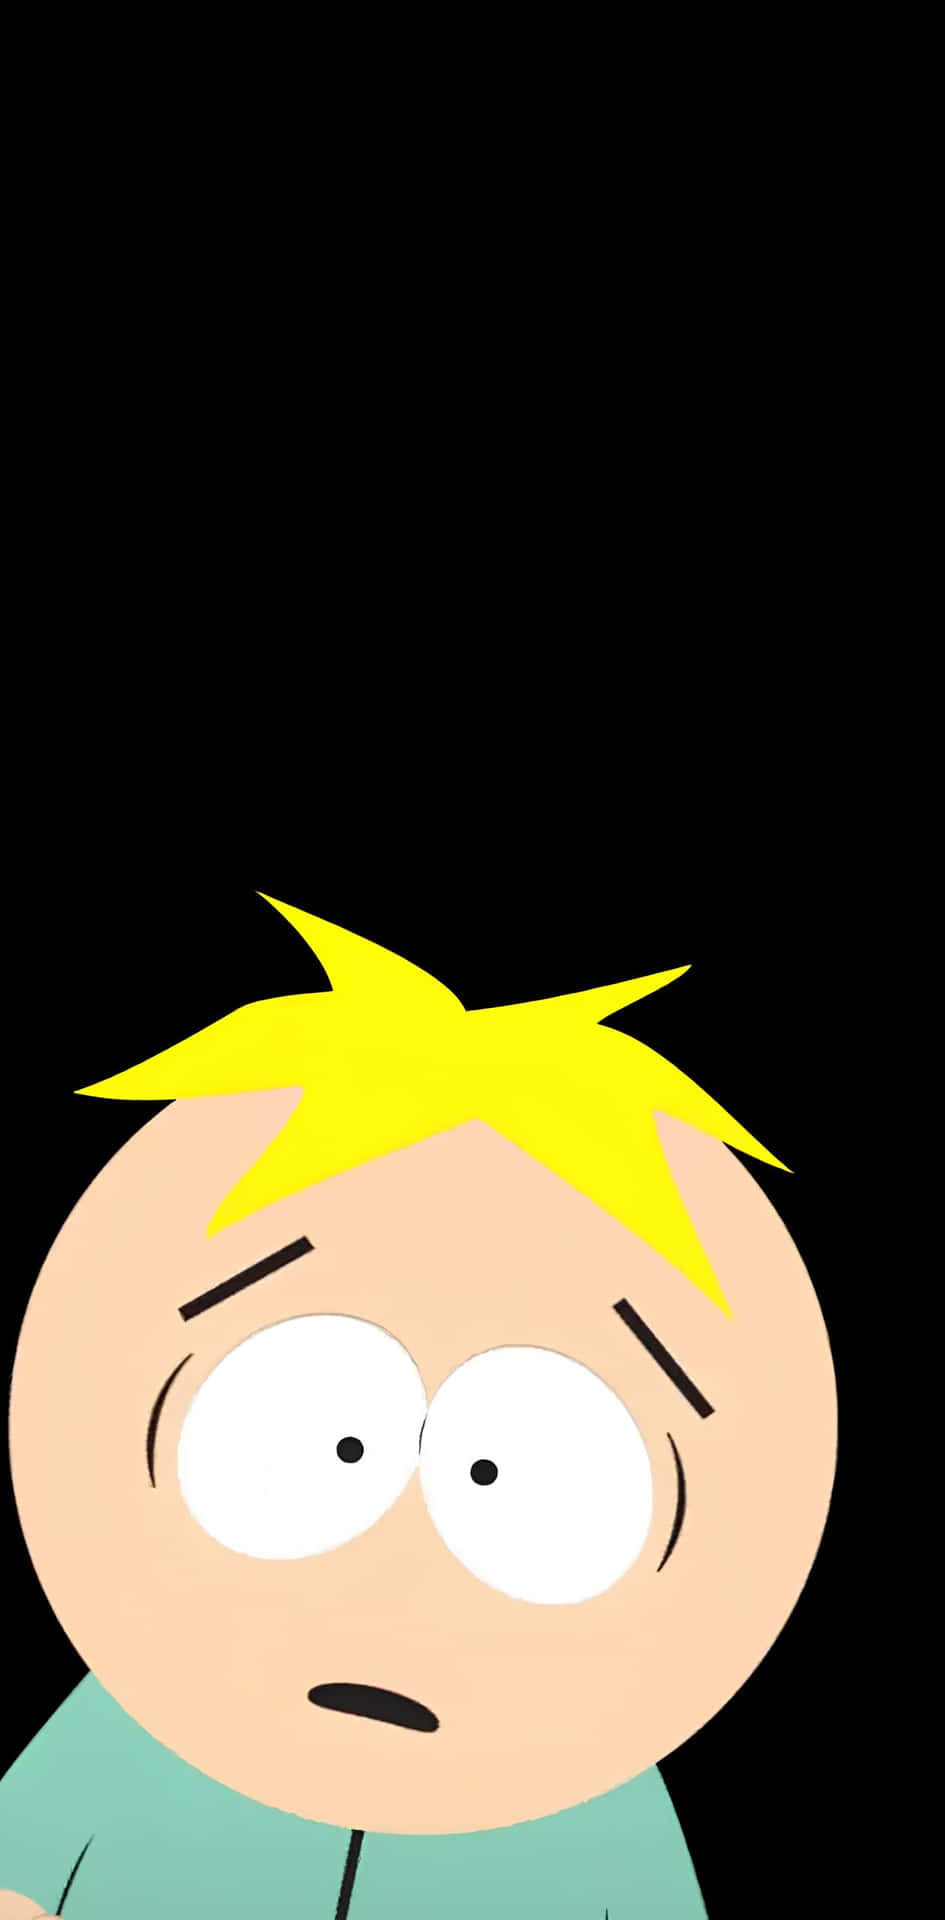 Animated Character With Blonde Hairand Blue Shirt Wallpaper